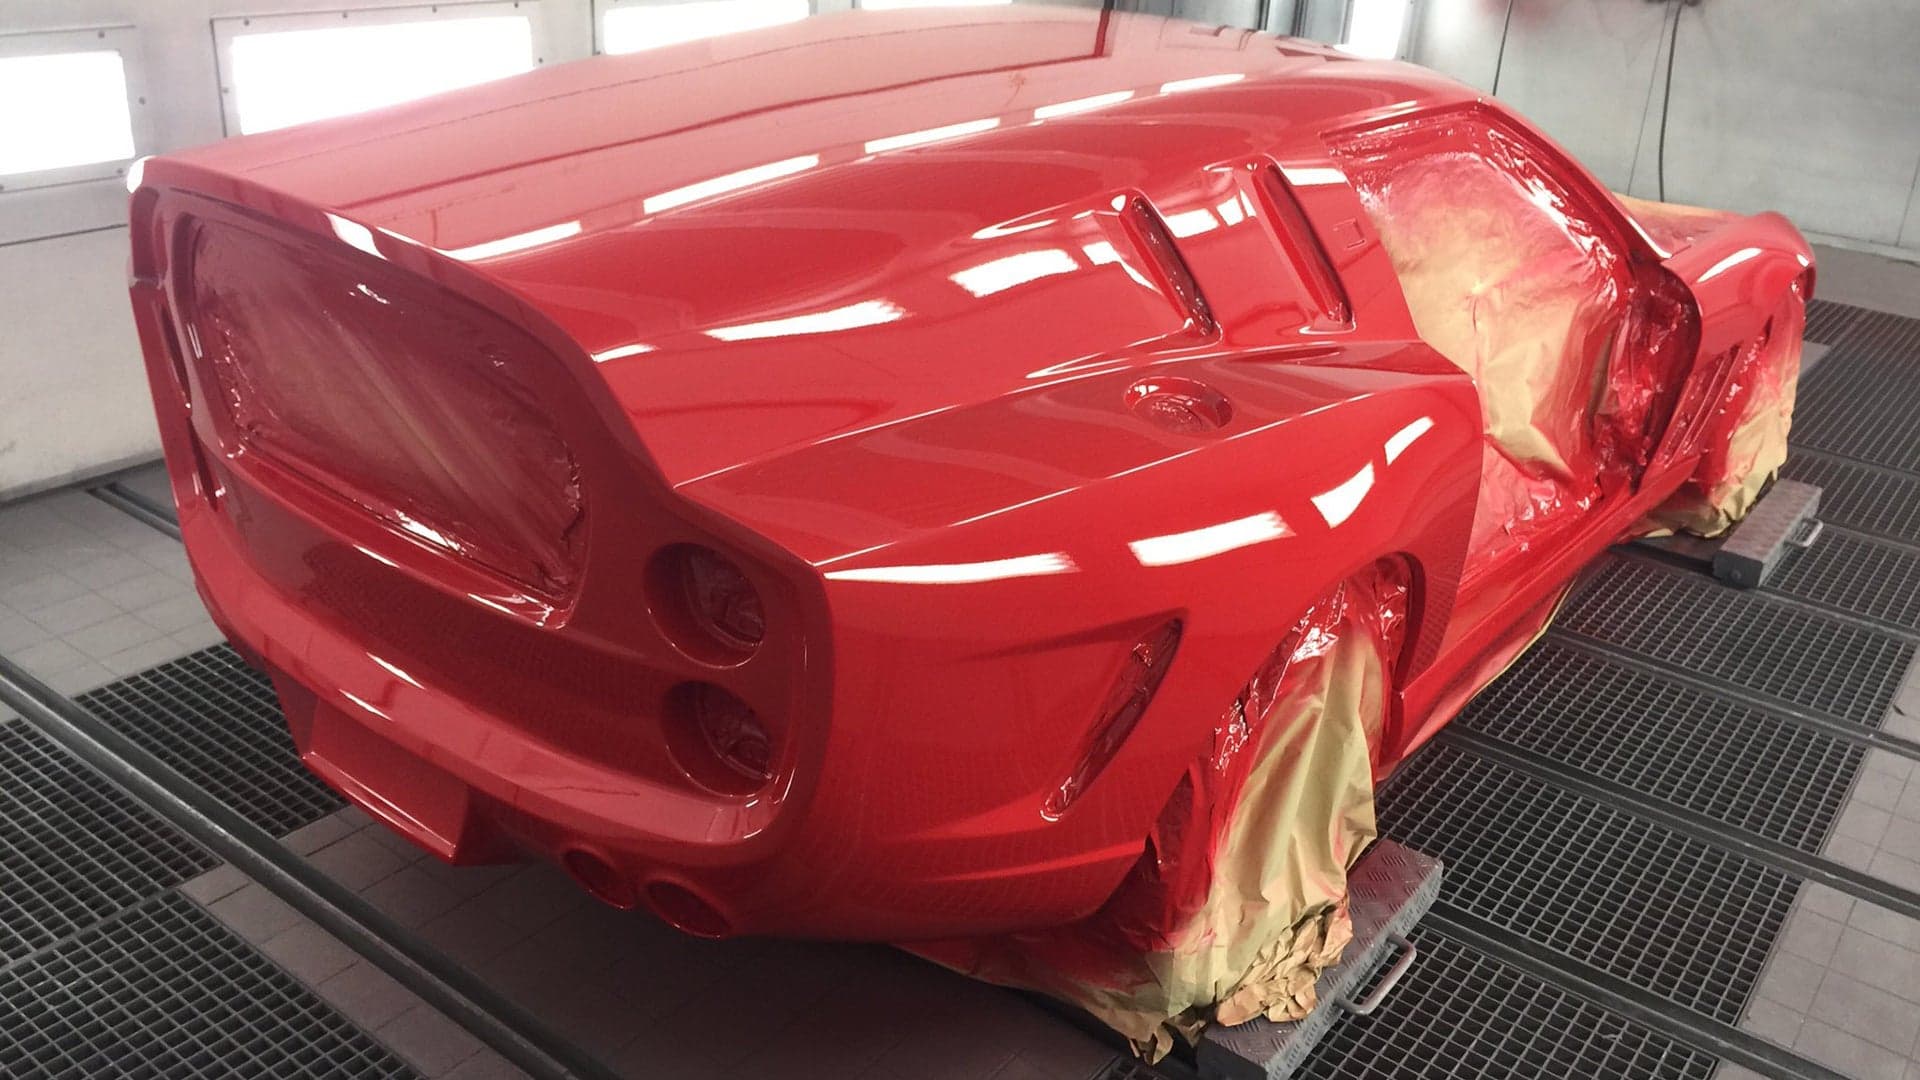 There’s a Modern Ferrari 250 GT Breadvan Homage in the Works Using a V12 Maranello